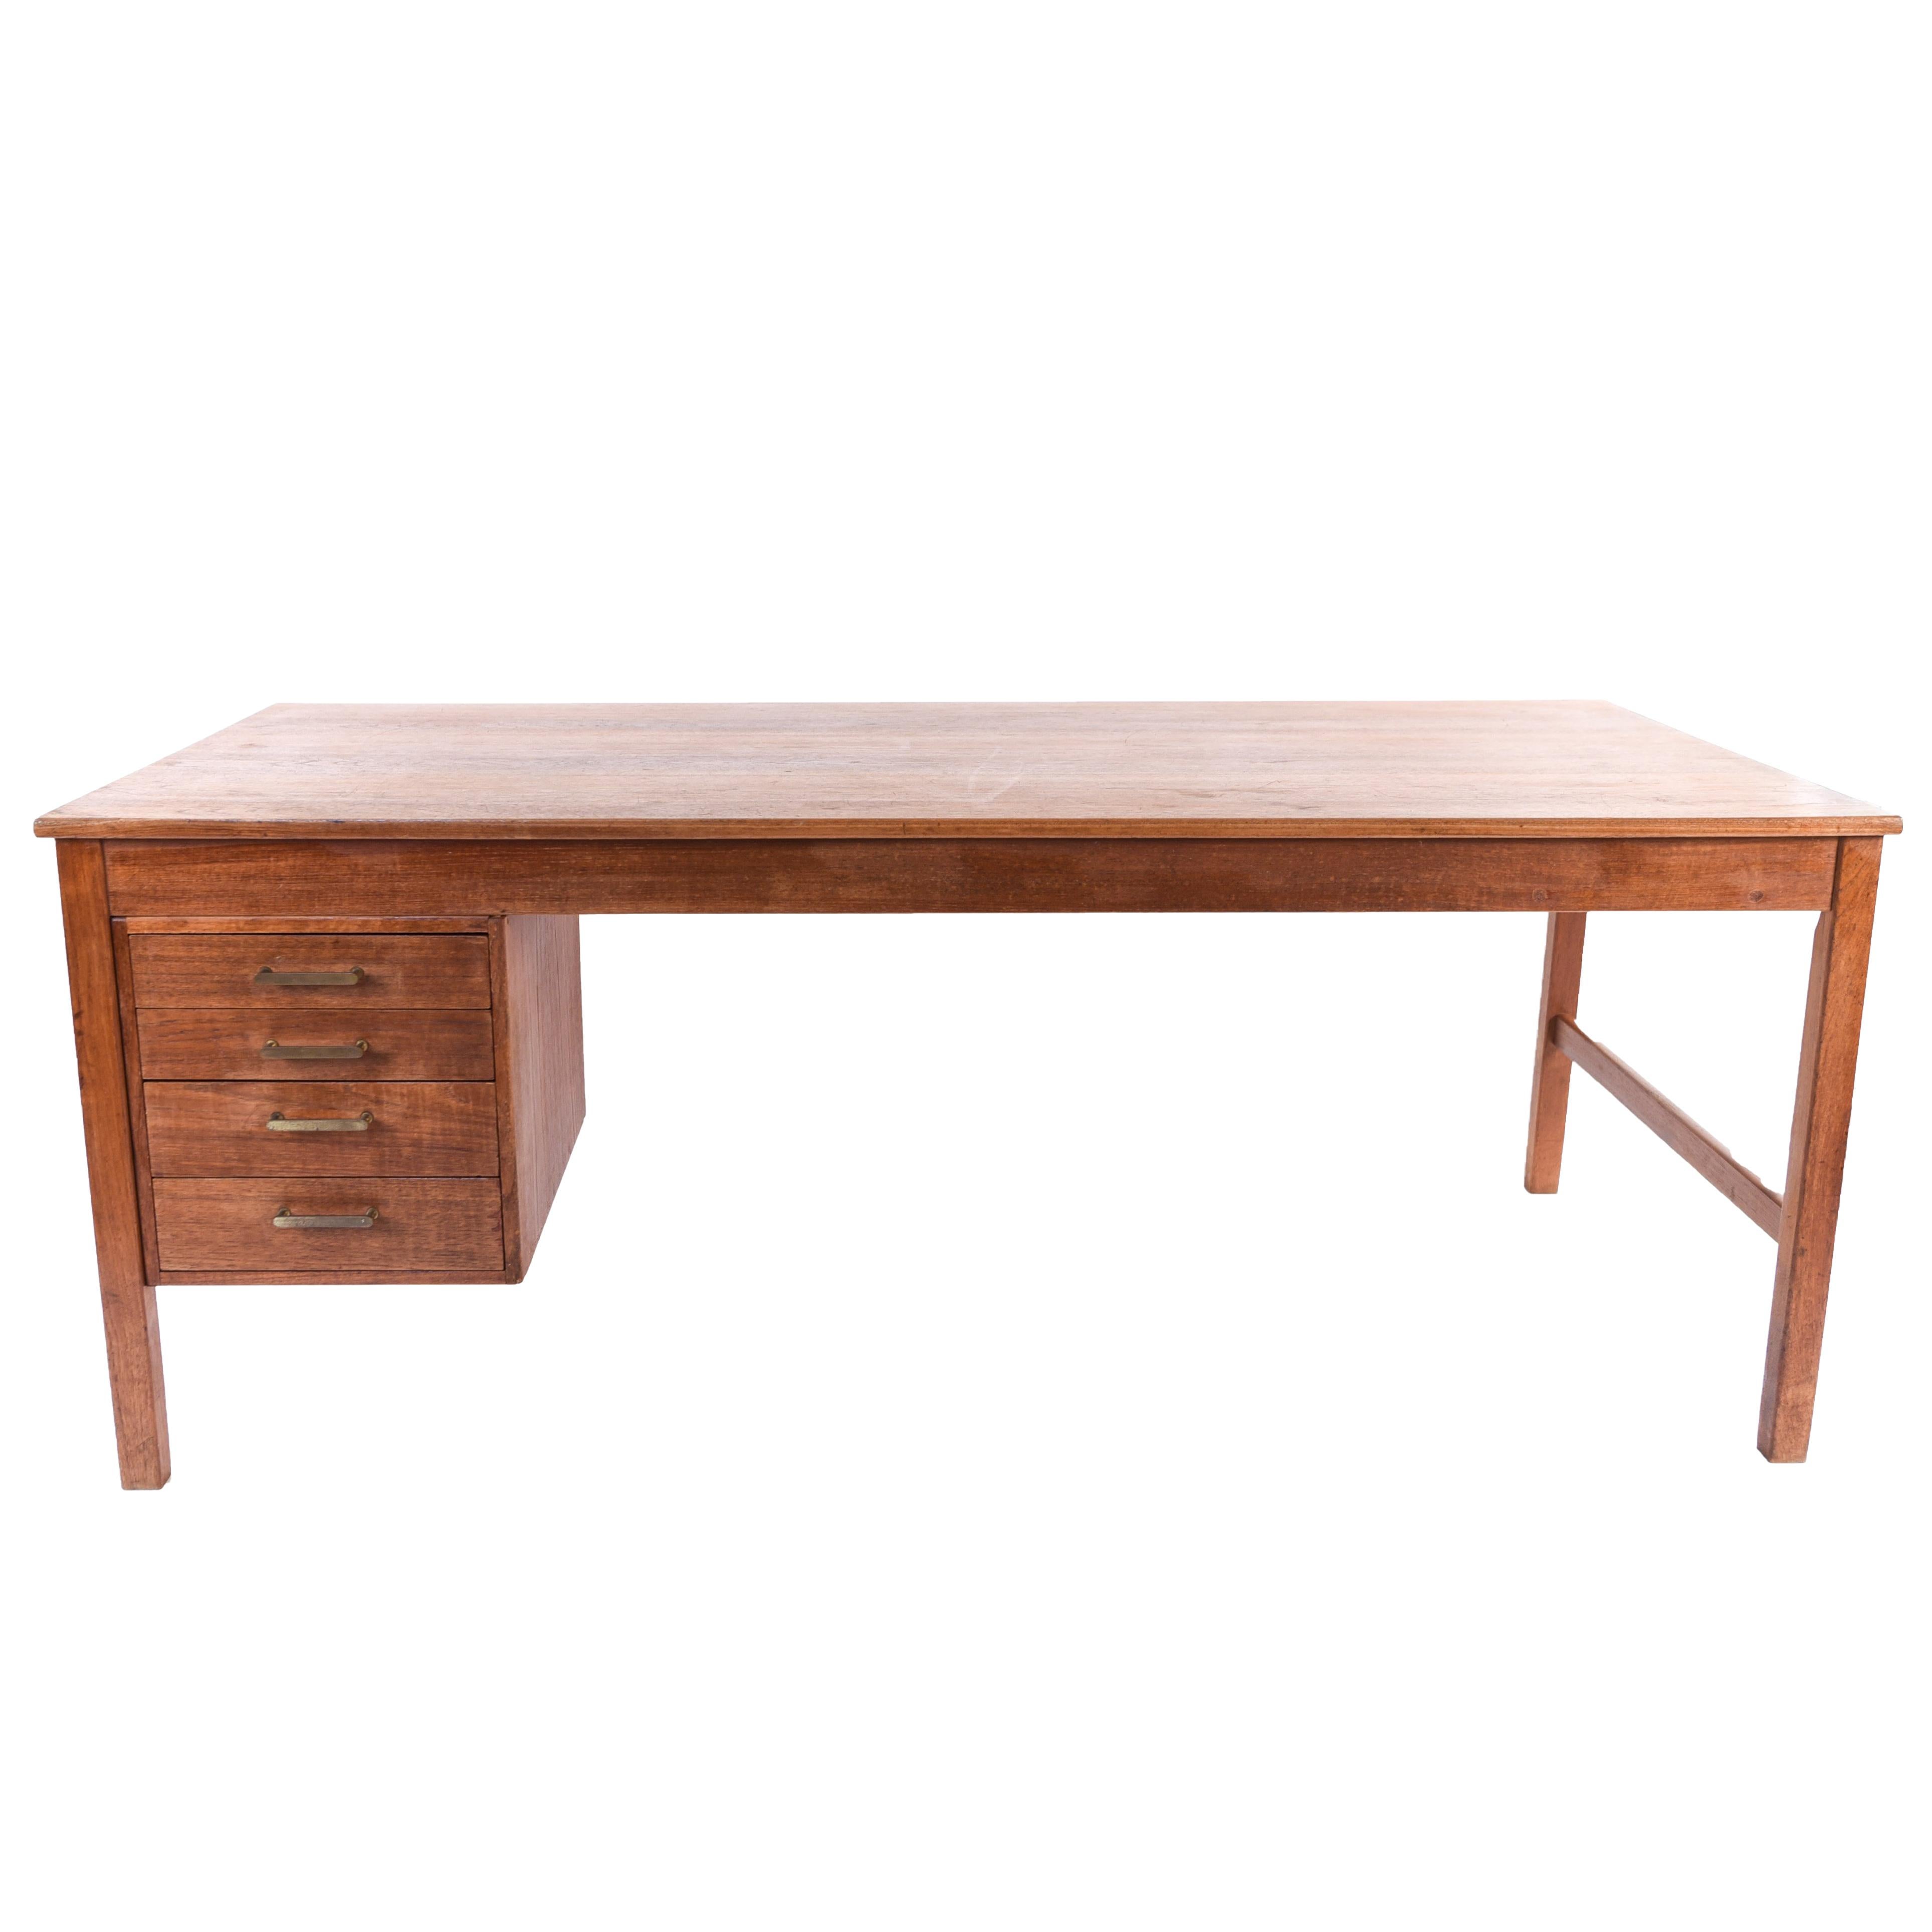 This Danish midcentury teak desk has a sleek modern design with thin legs and writing surface. Drawers with brass handles provide storage to the otherwise minimal piece.